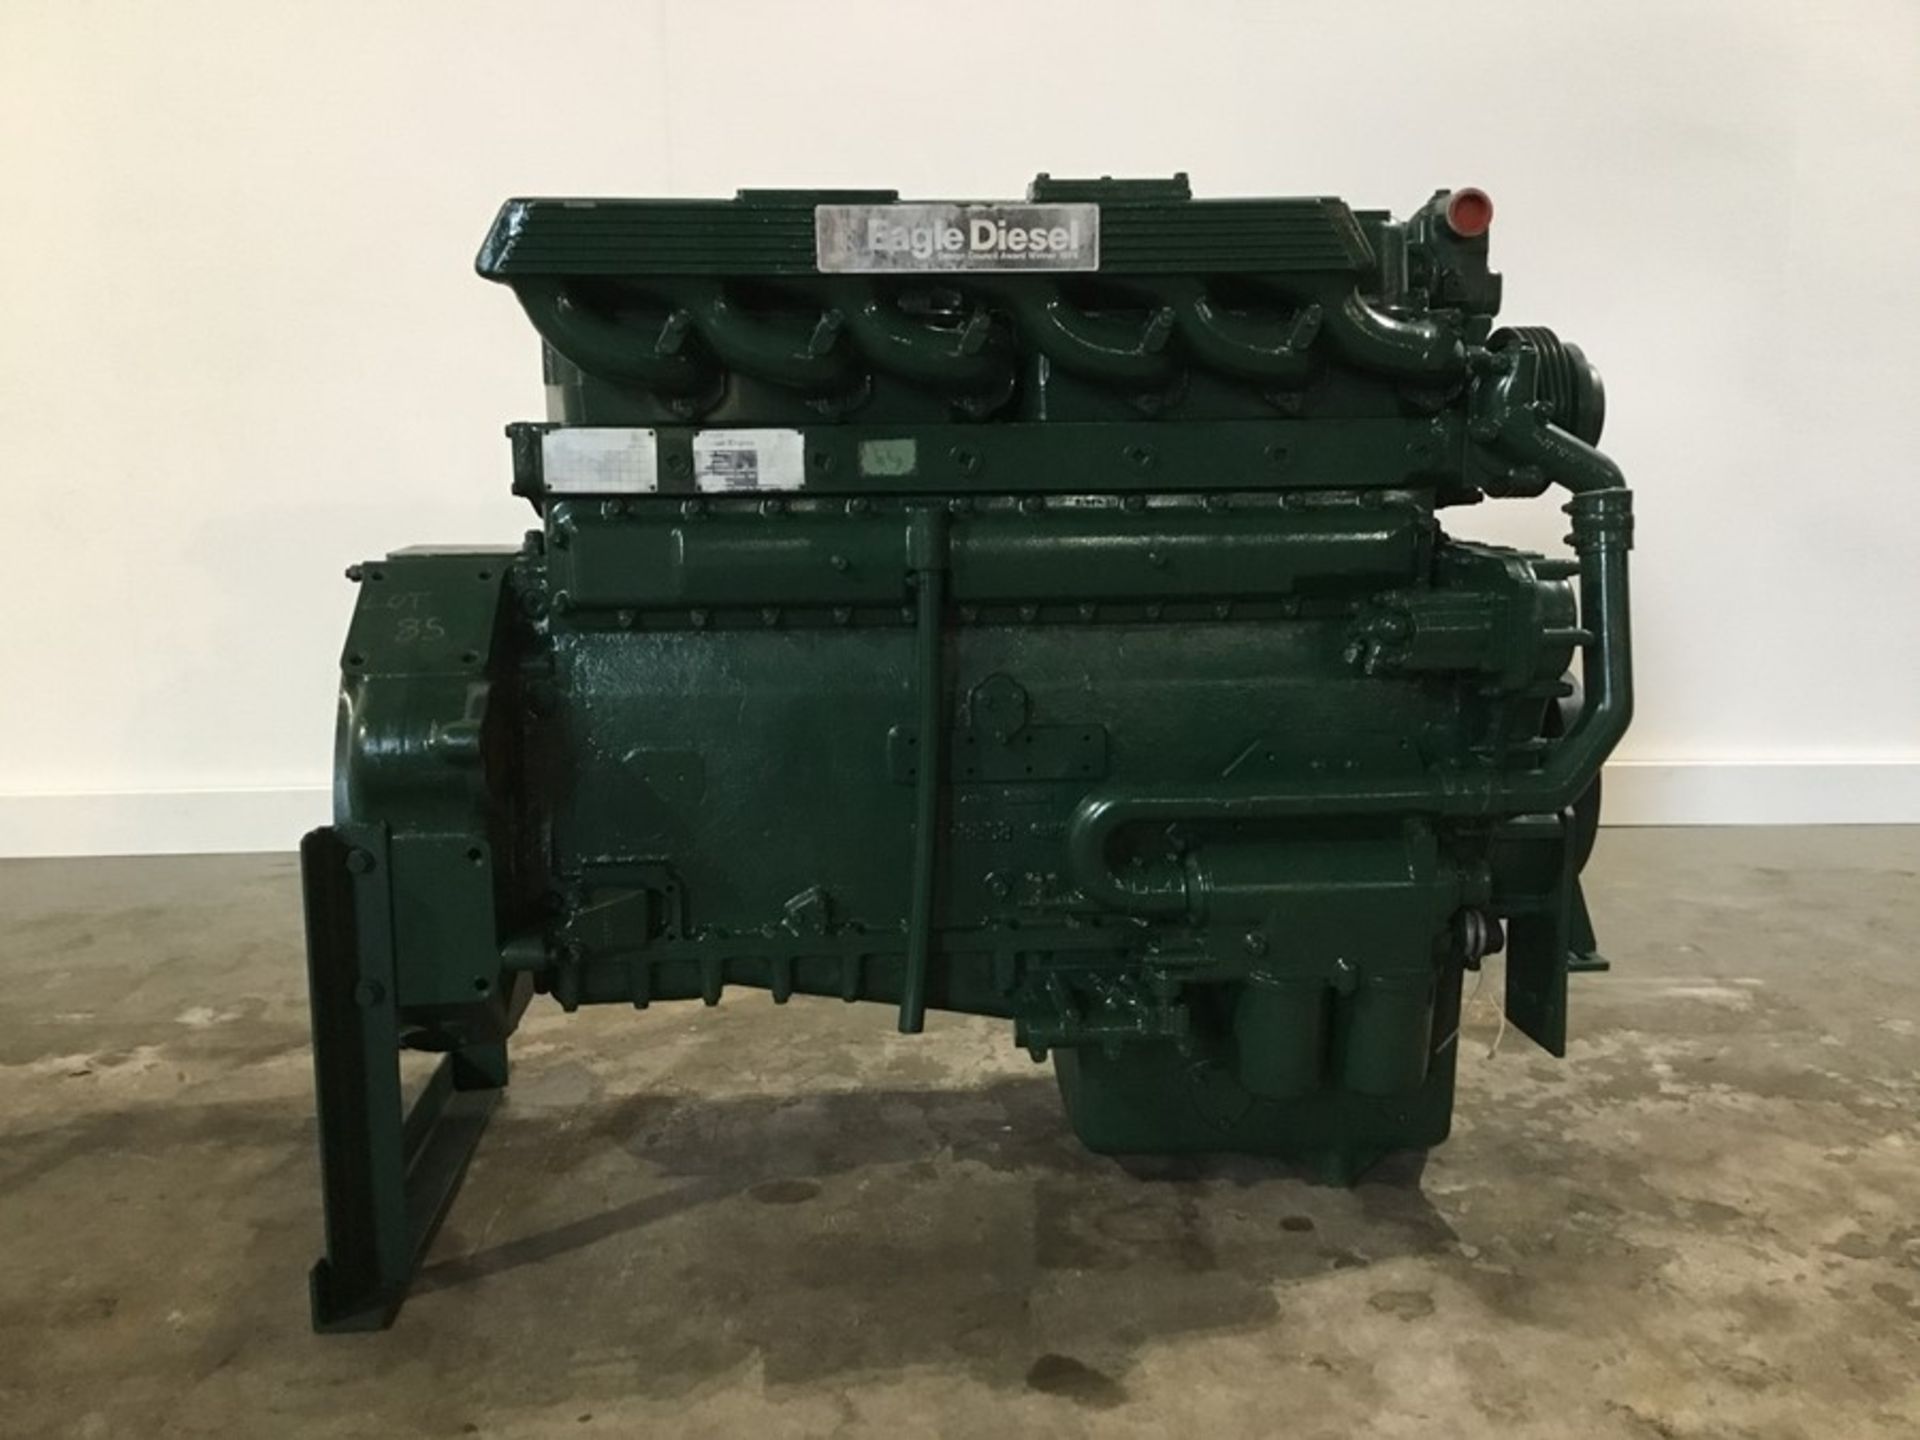 Rolls Royce E220 Diesel engine: Rolls Royce E220 6cyl Serial Number 628223D870/44359 build - Image 14 of 18